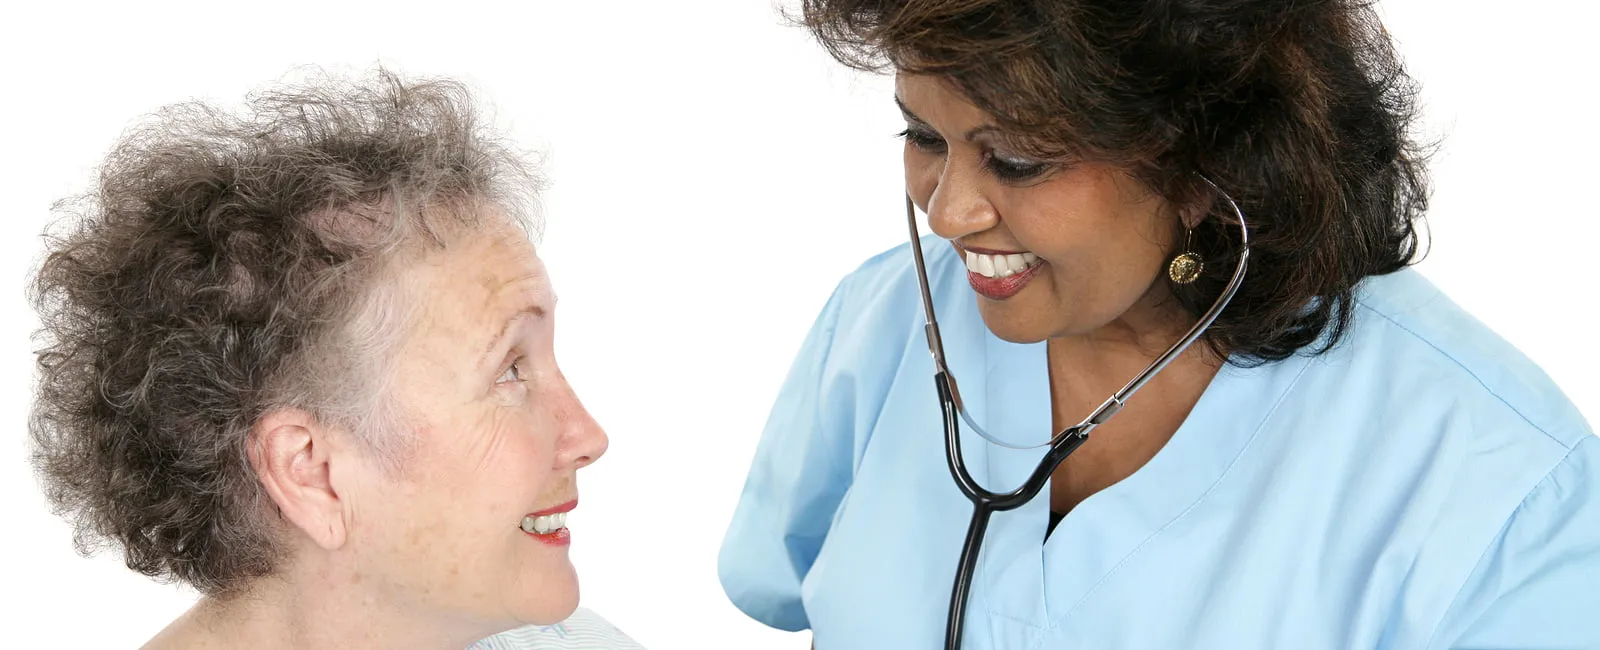 Companion Care: A Solution to Improve Quality of Life for Seniors Managing Chronic Diseases